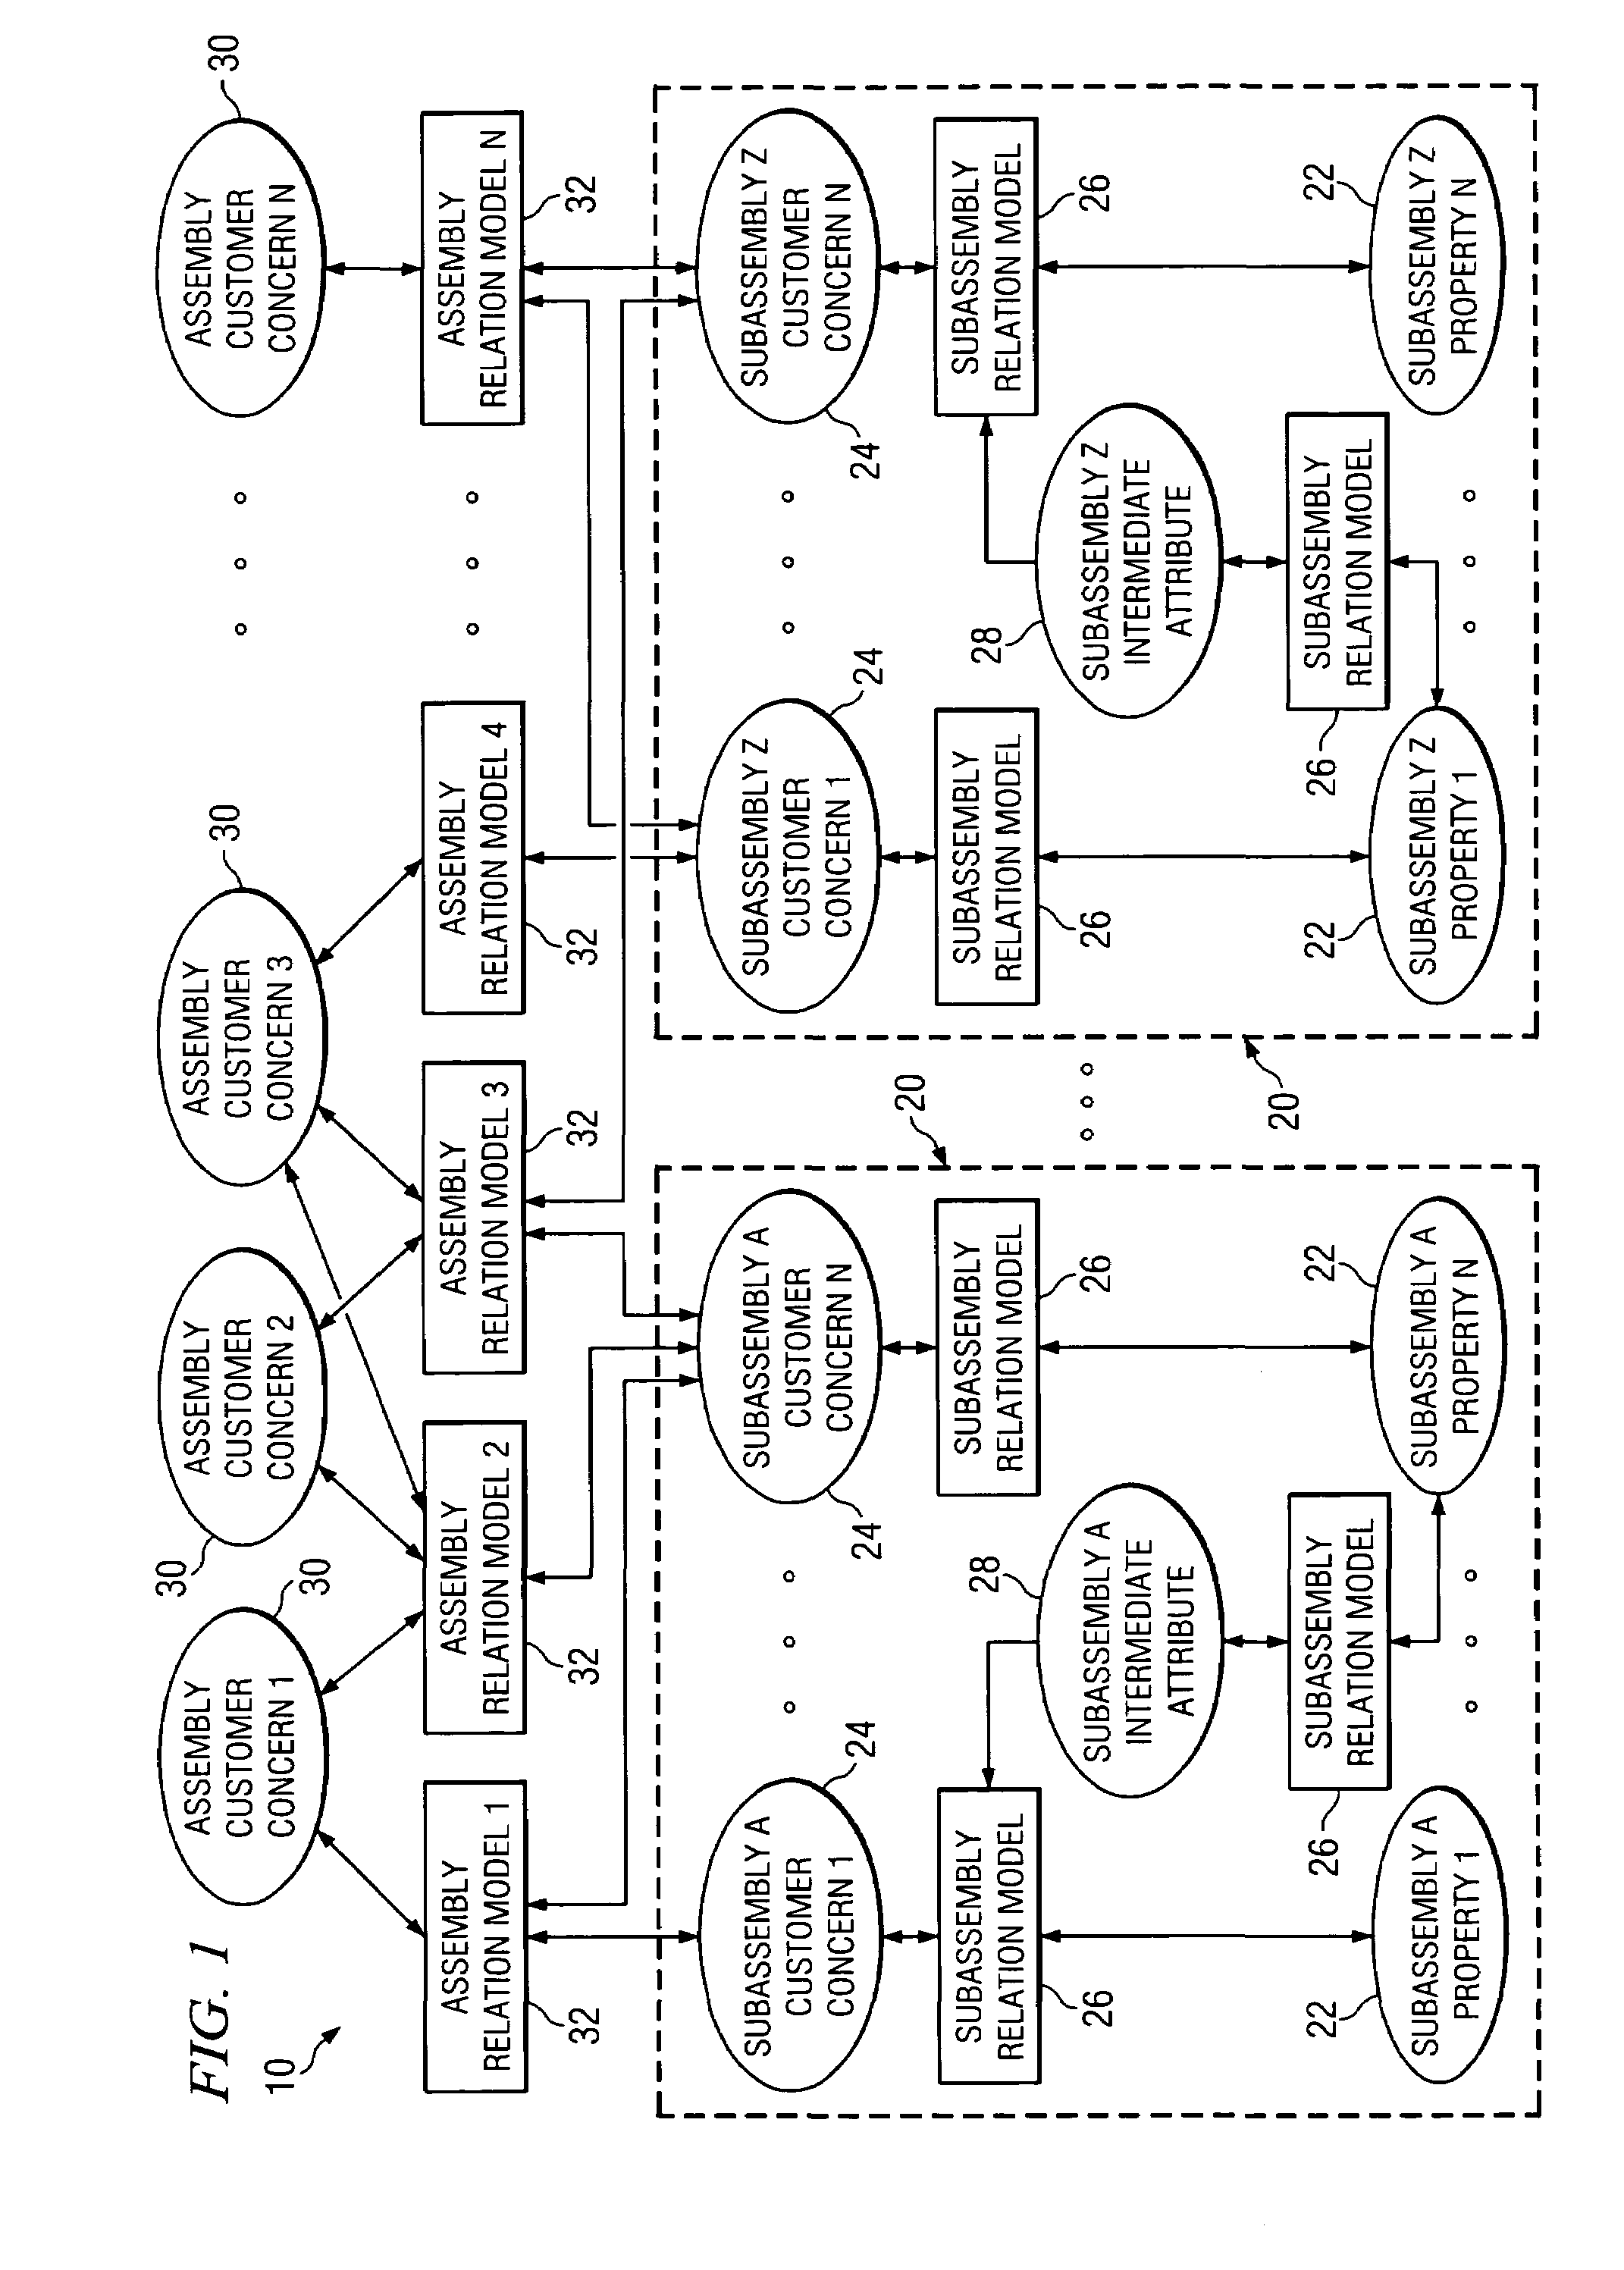 System, method, and software for relation-based product development